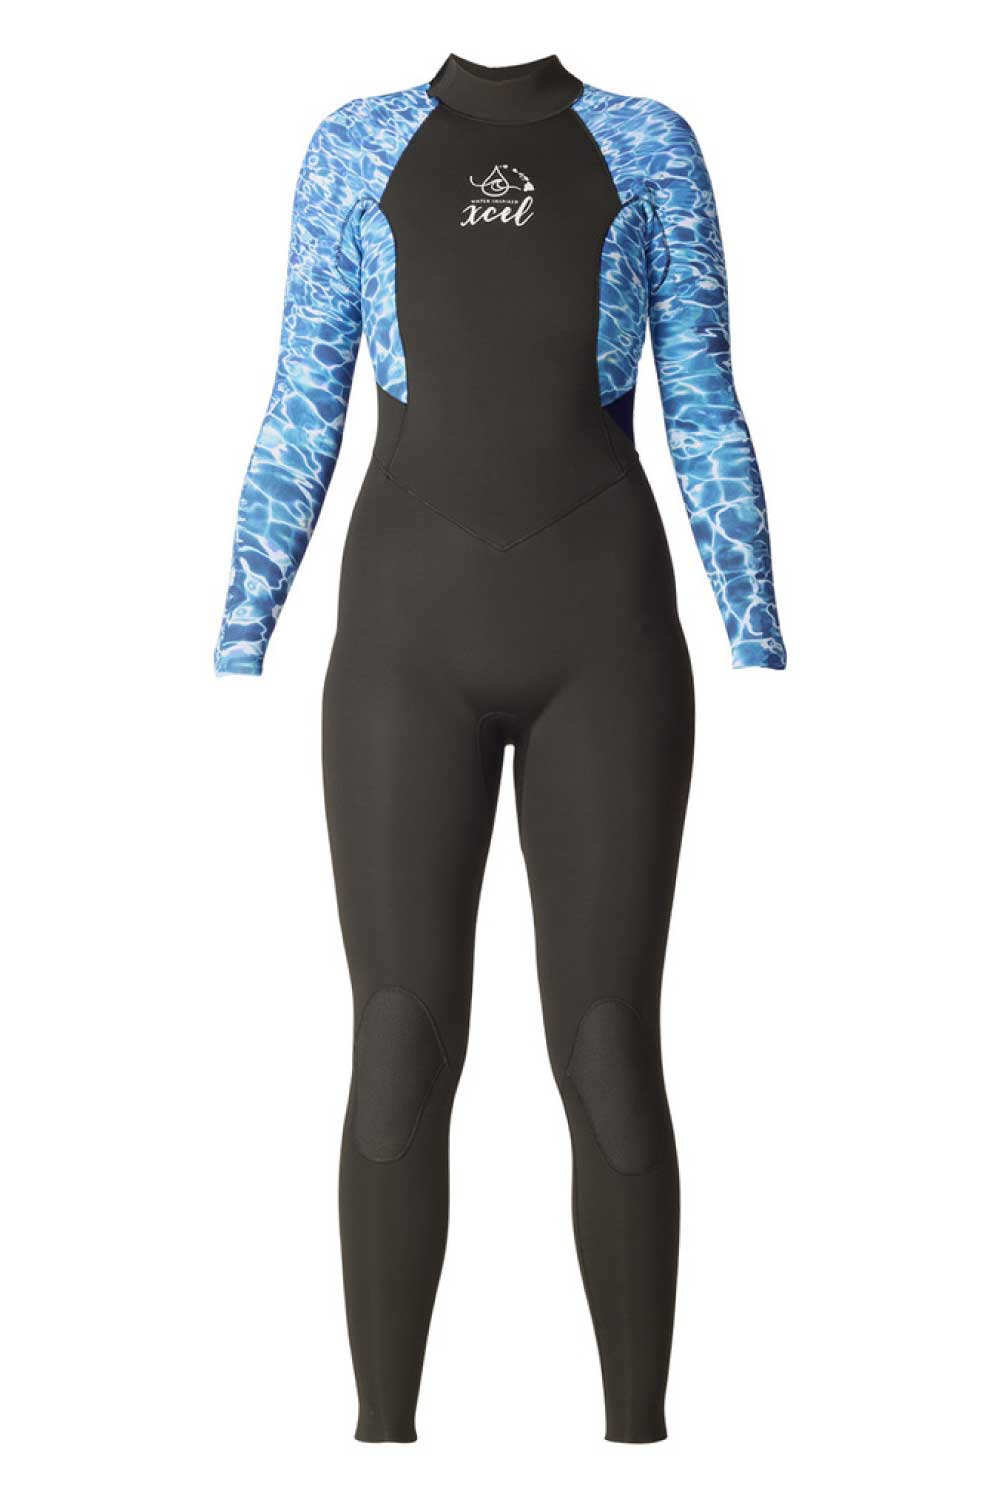 XCEL Womens AXIS 3/2mm Full Suit Steamer